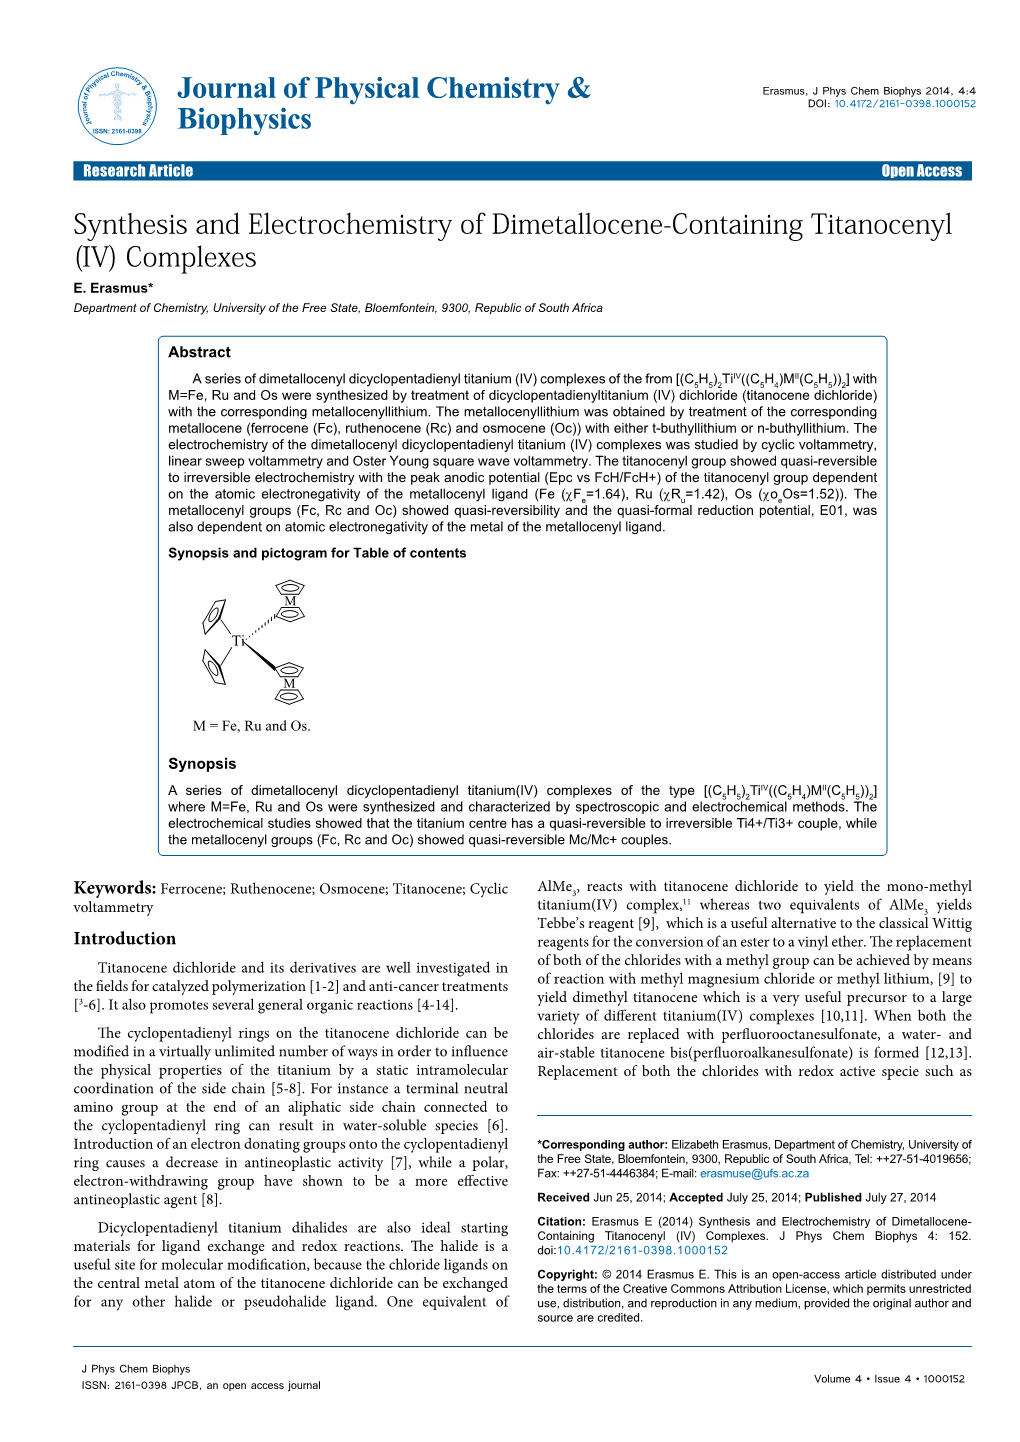 Synthesis and Electrochemistry of Dimetallocene-Containing Titanocenyl (IV) Complexes E